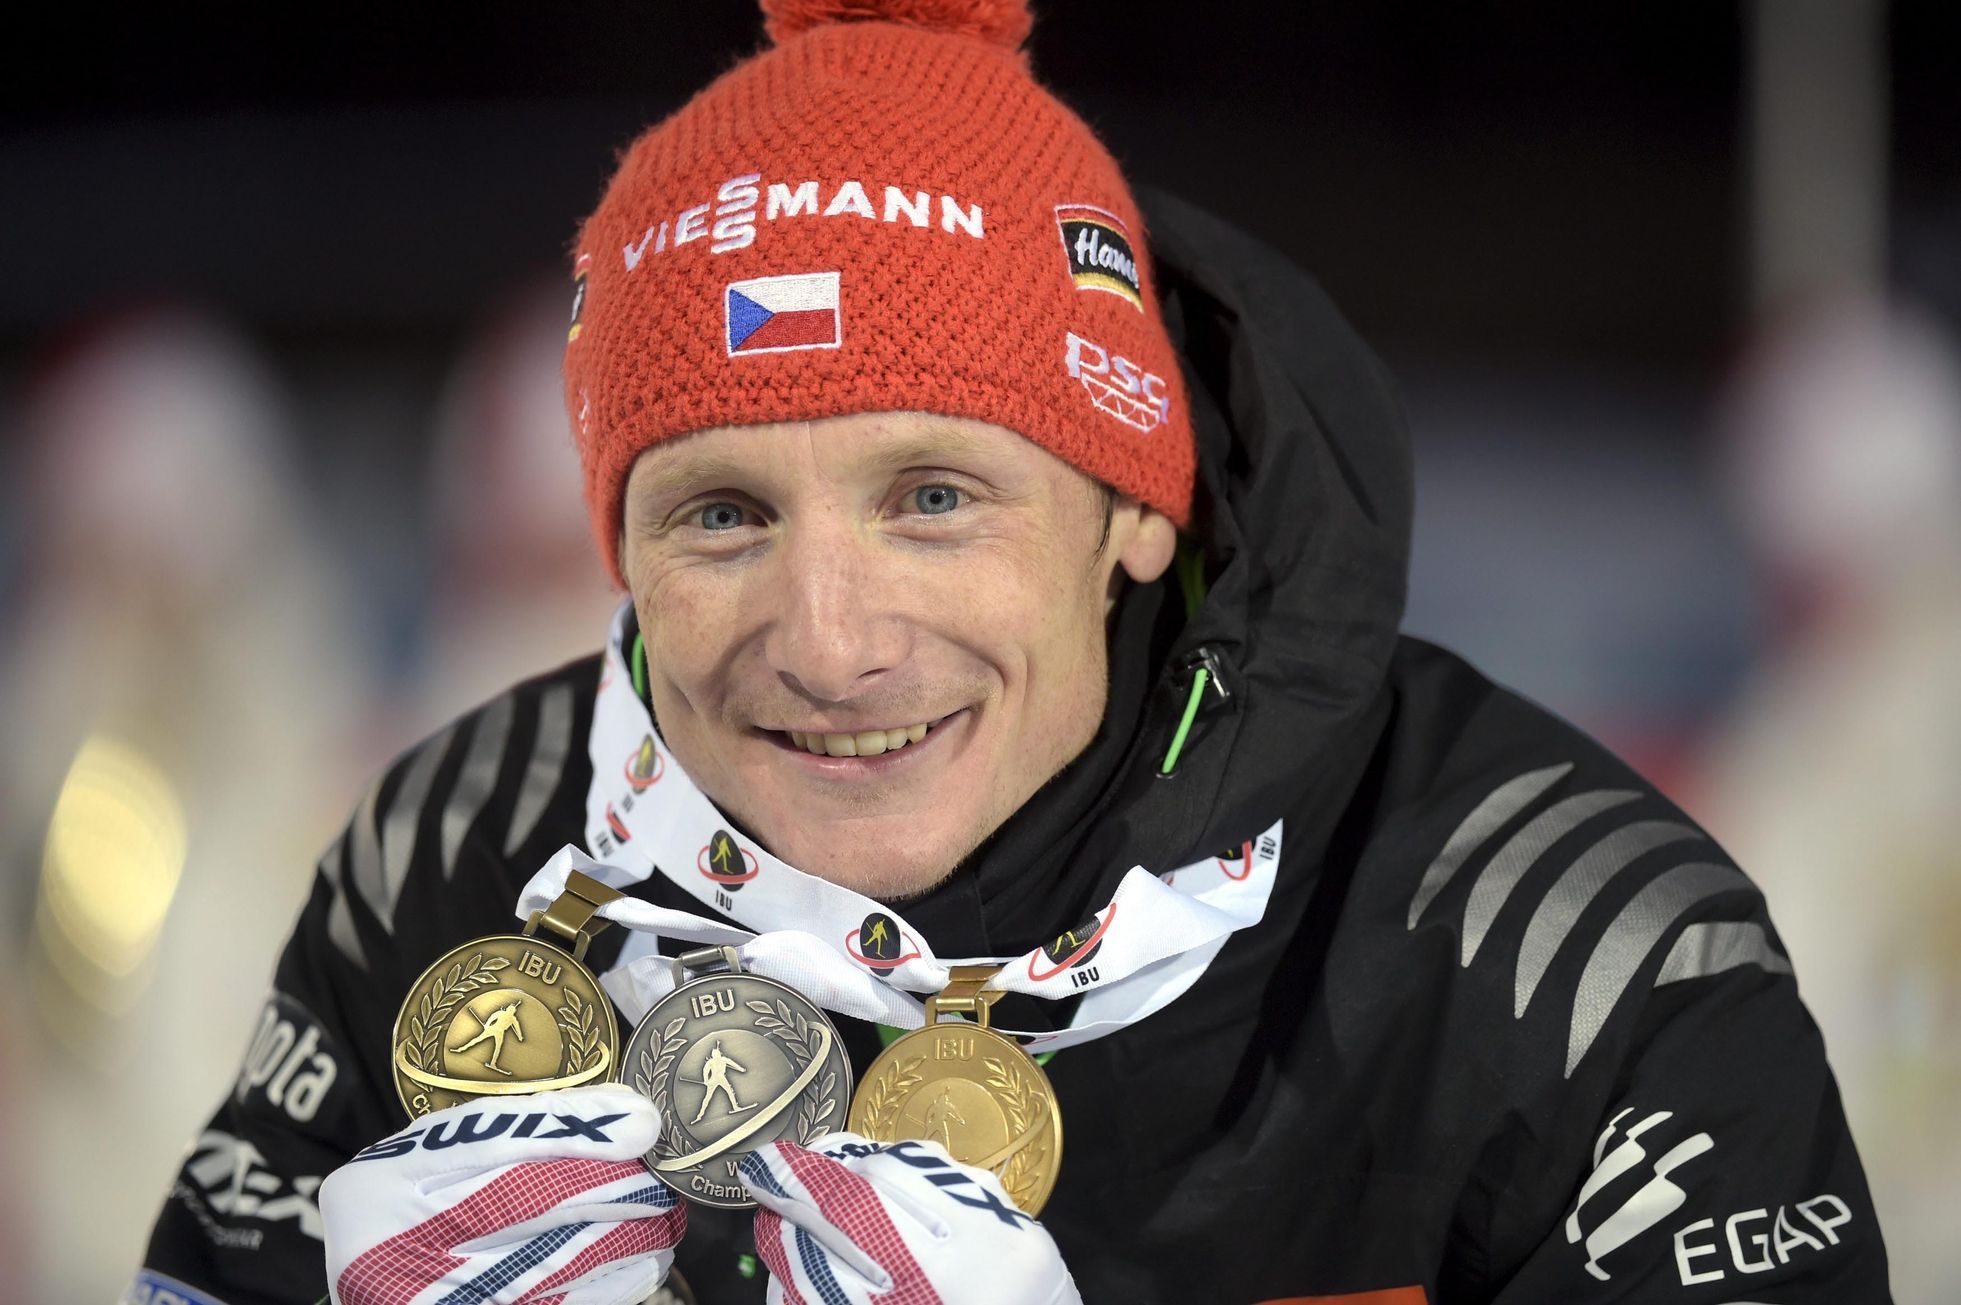 Czech Republic's Moravec poses with his medals at the IBU Biathlon World Championships in Kontiolahti